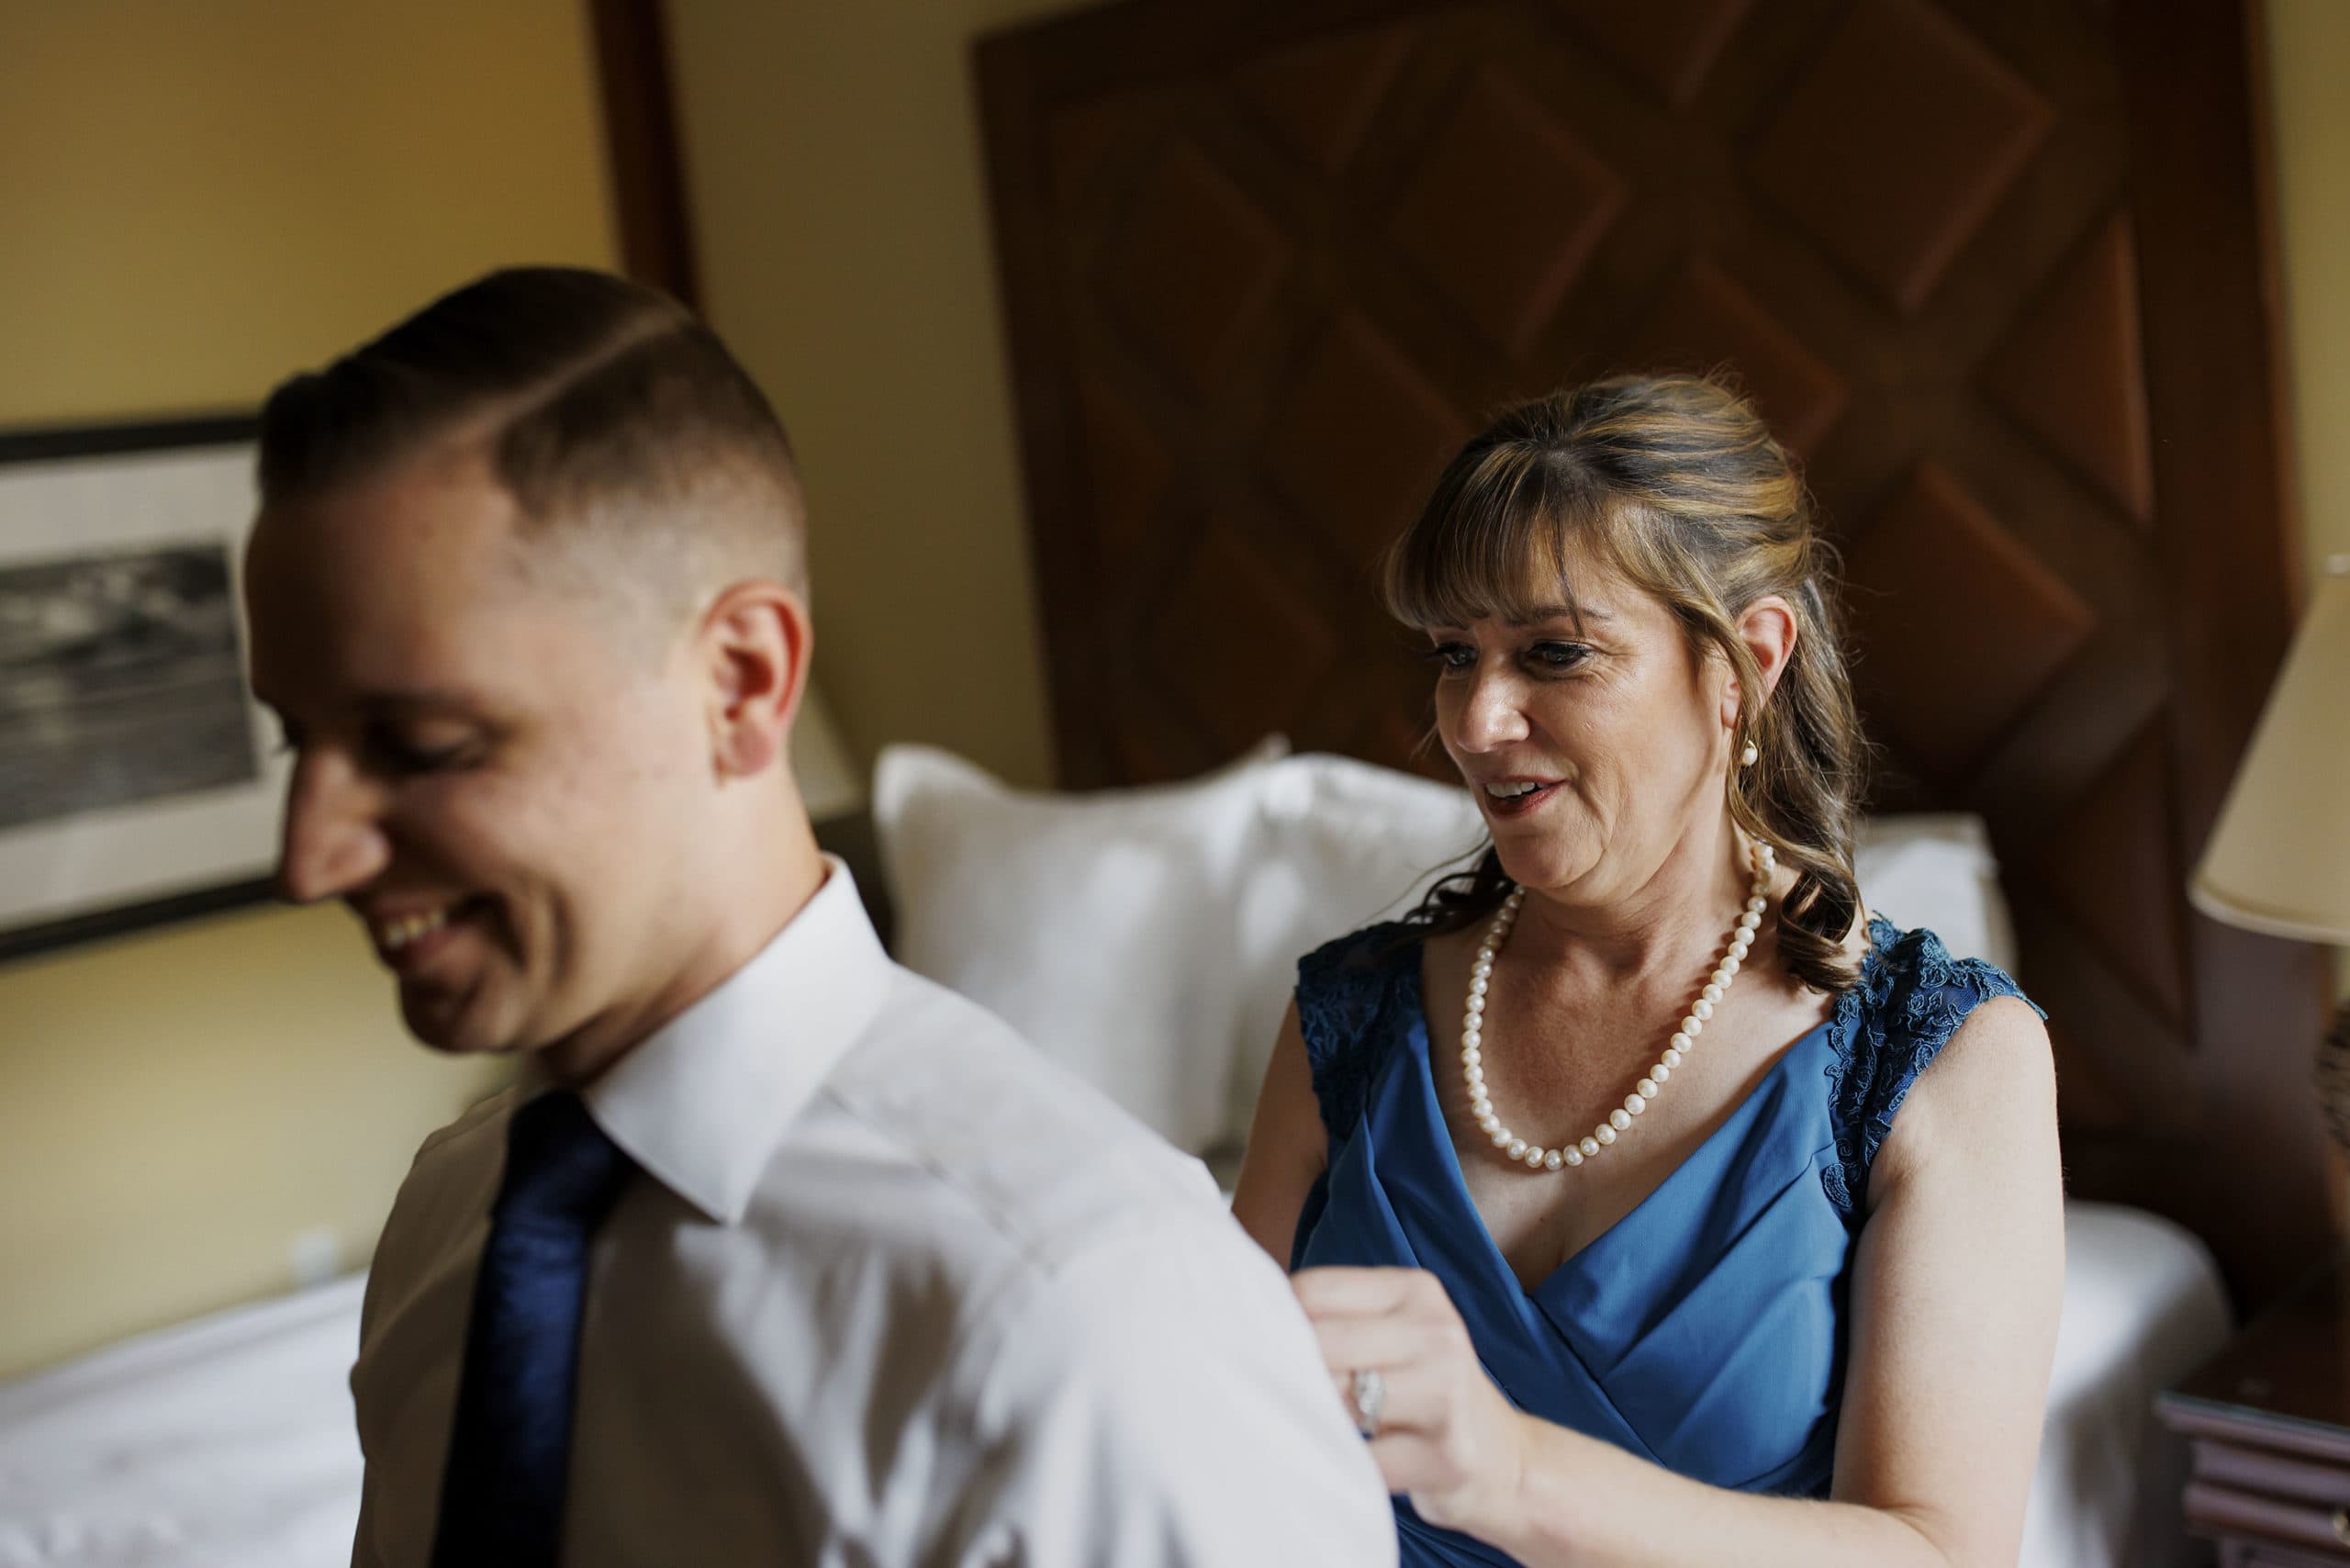 The groom’s mother helps him get dressed